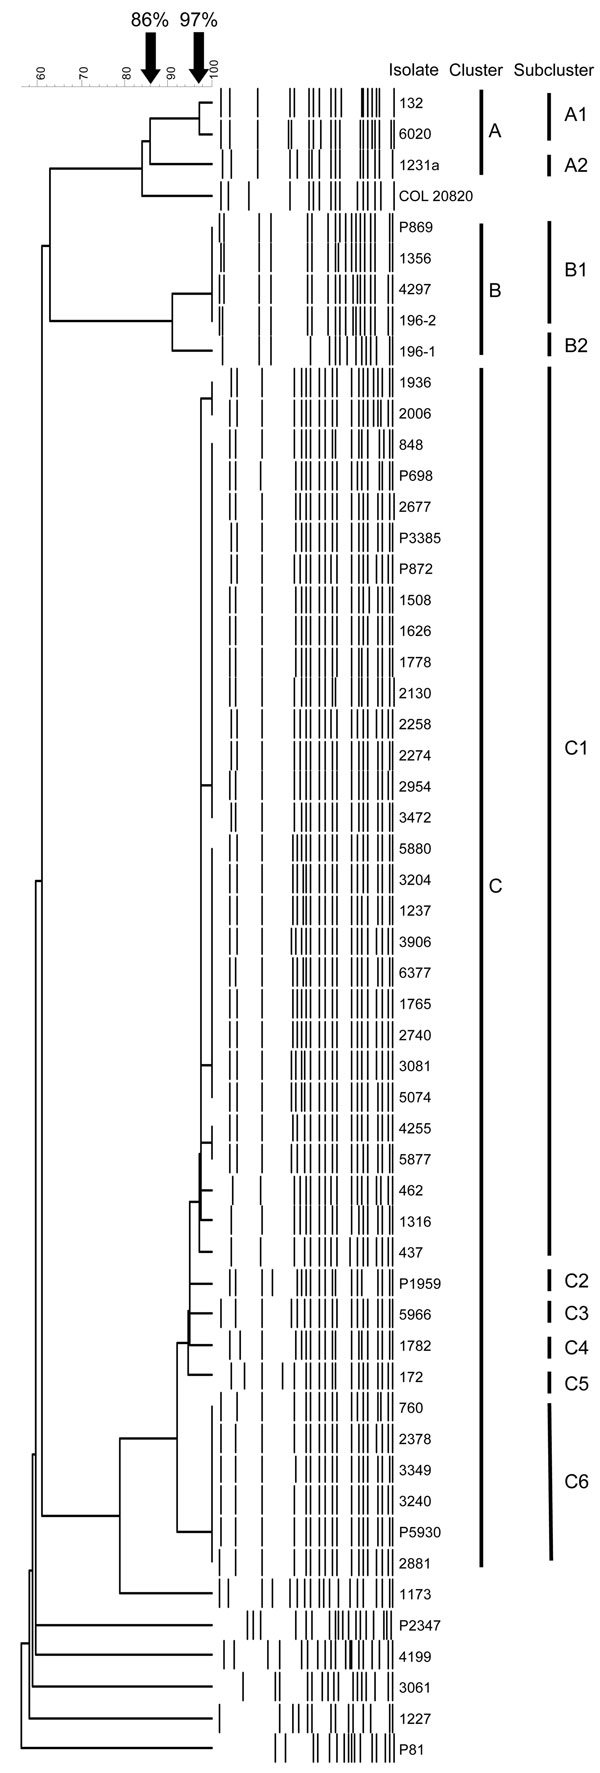 Computer-assisted cluster analysis of pulsed-field gel electrophoresis fingerprints of 53 Acinetobacter baumannii and 2 Acinetobacter spp. pittii isolates. COL 20820 was used as the reference standard for normalization of the digitized gels (14).